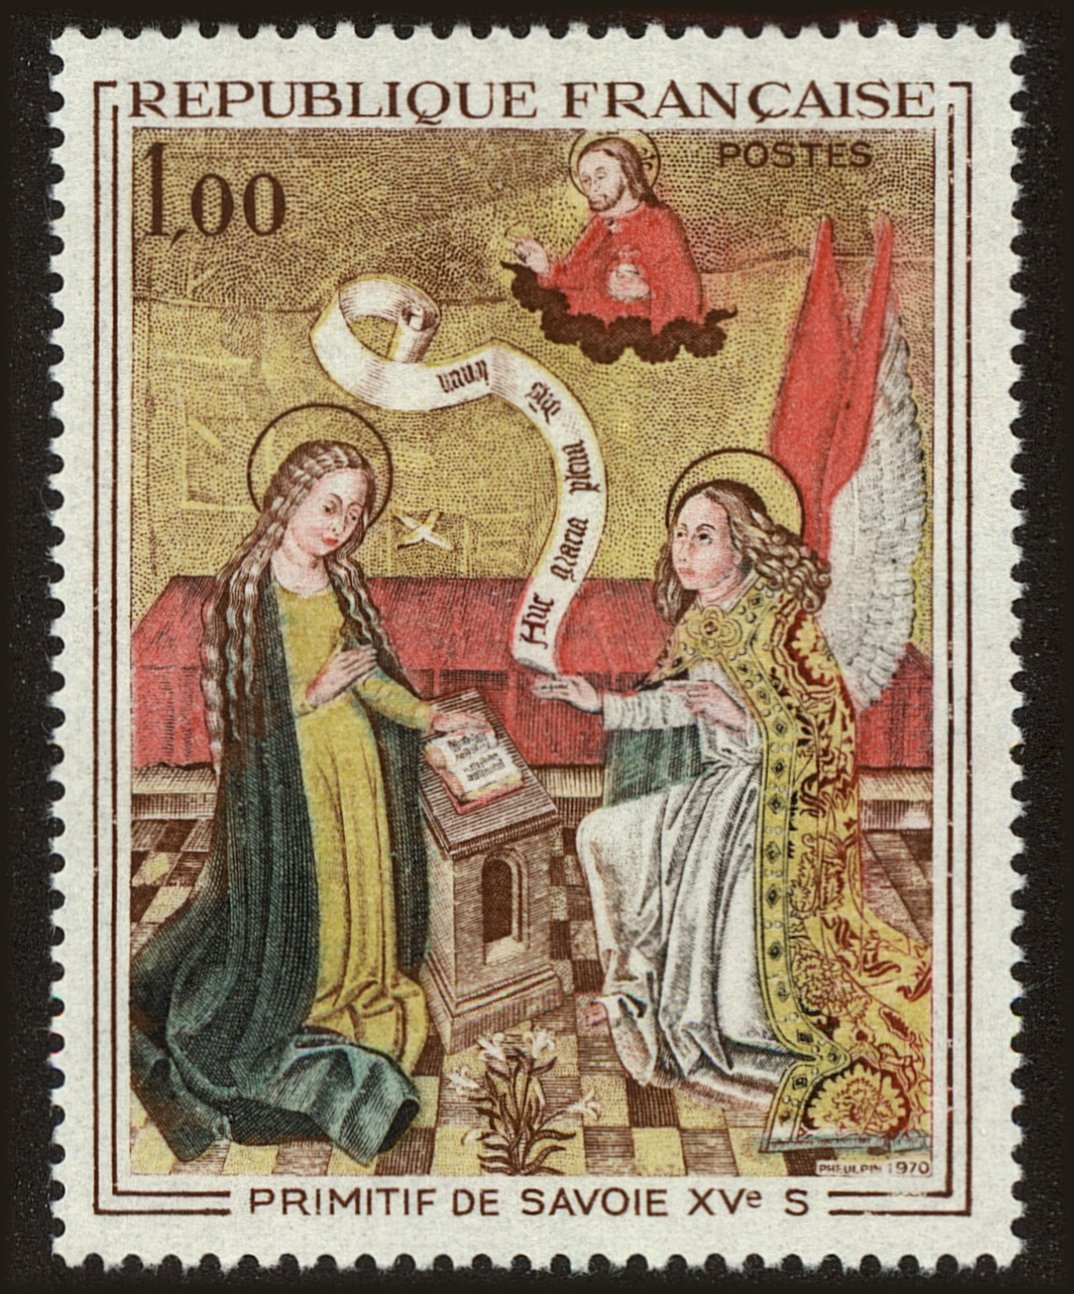 Front view of France 1273 collectors stamp